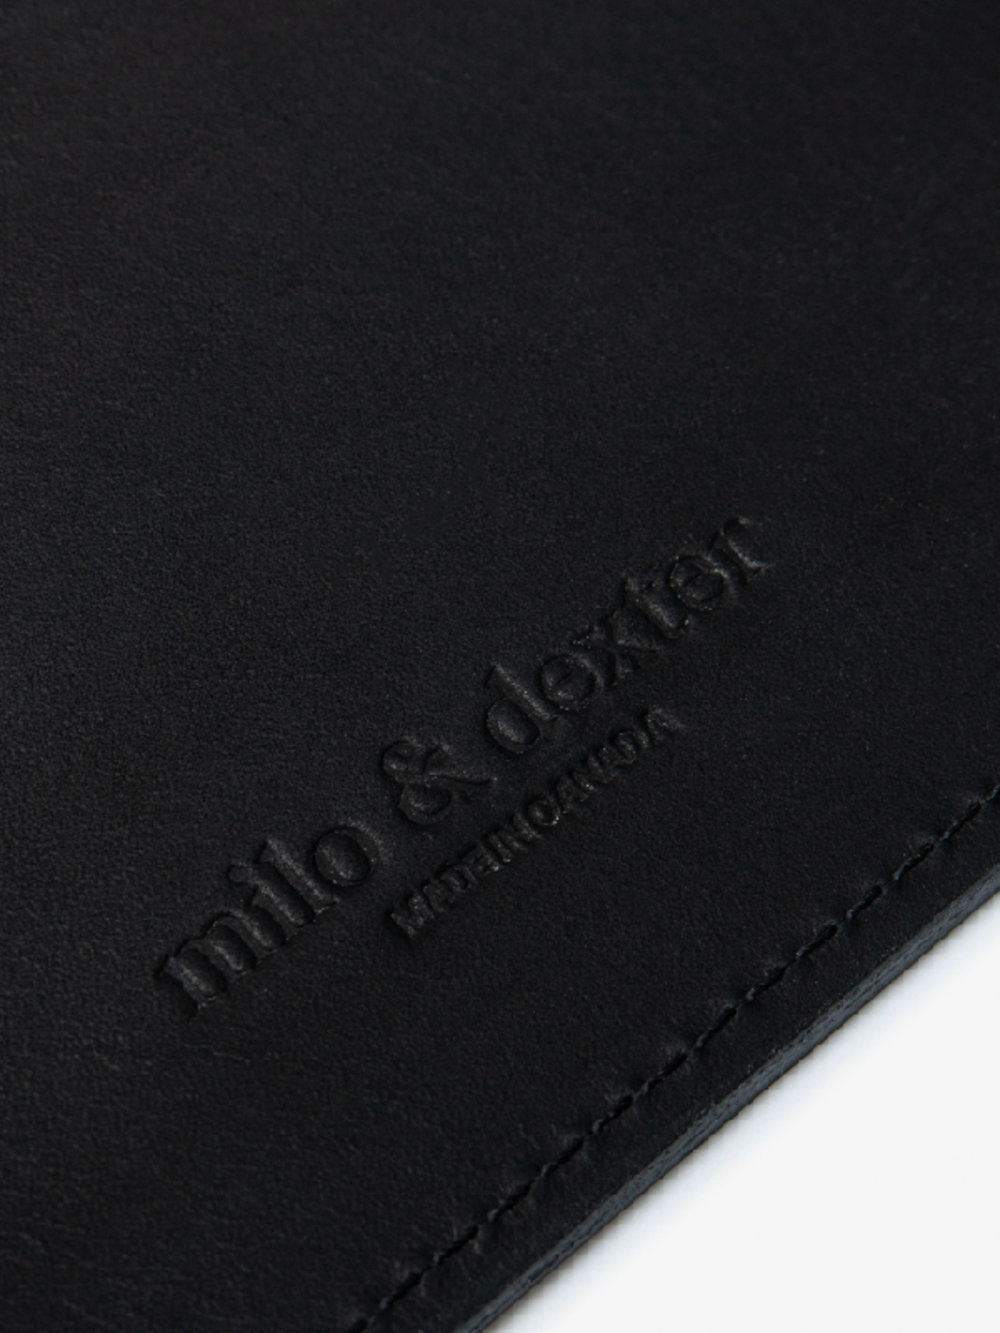 Milo & Dexter - SS24 - Classic Leather Laptop Sleeve in Black - close -up 3